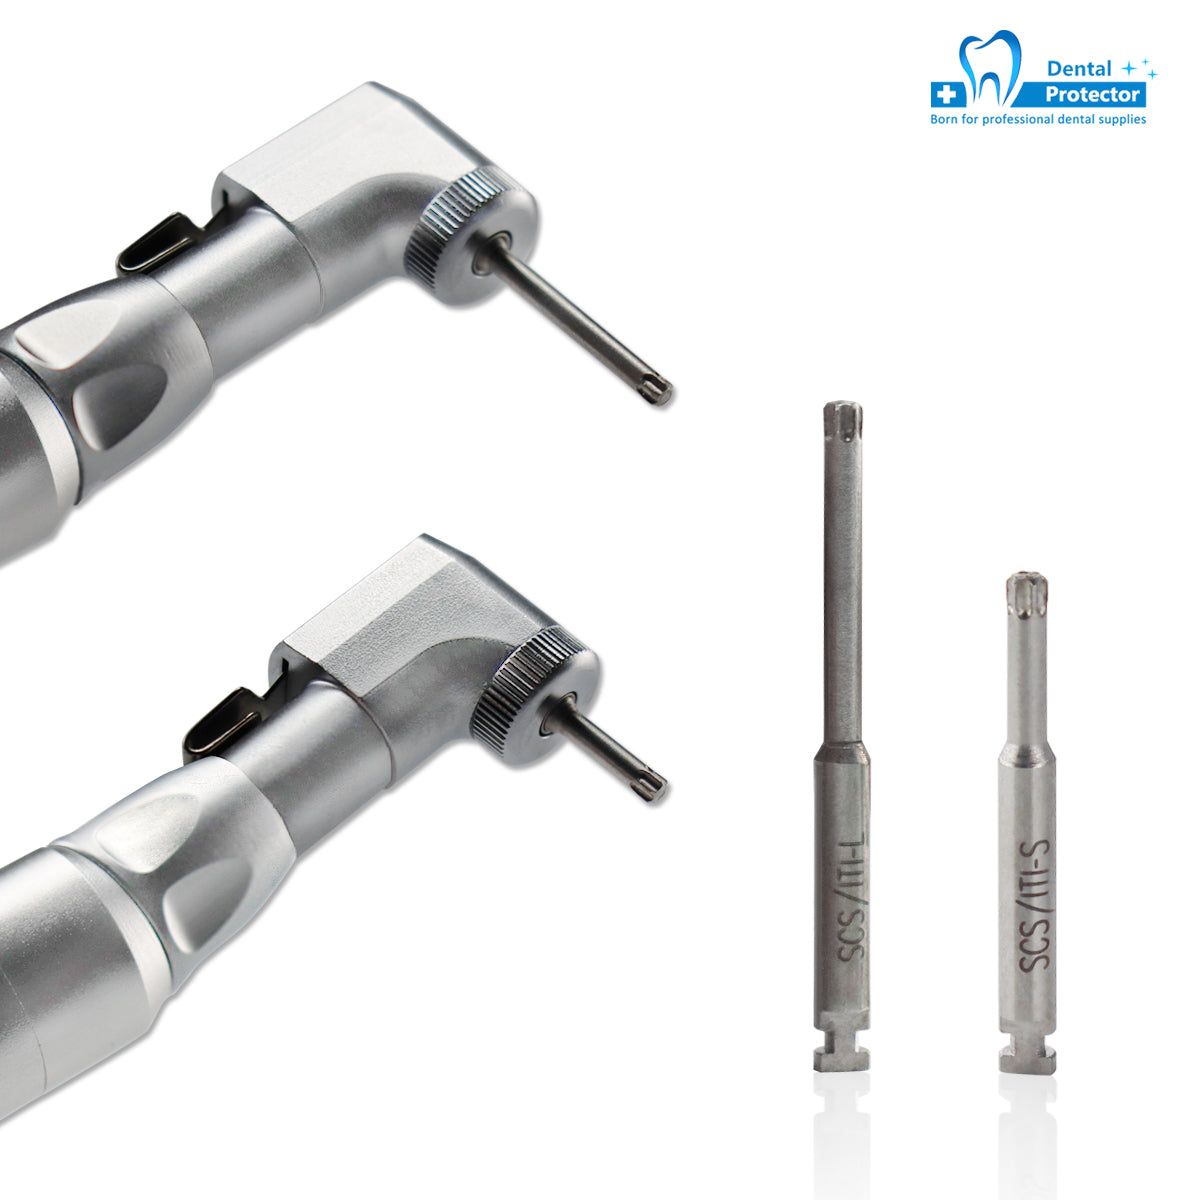 Dental Low Speed Handpiece Implant Torque Wrench 5N-35N Drivers 2.35mm Latch Type Bits Contra Angle Universal Silver Metal Box